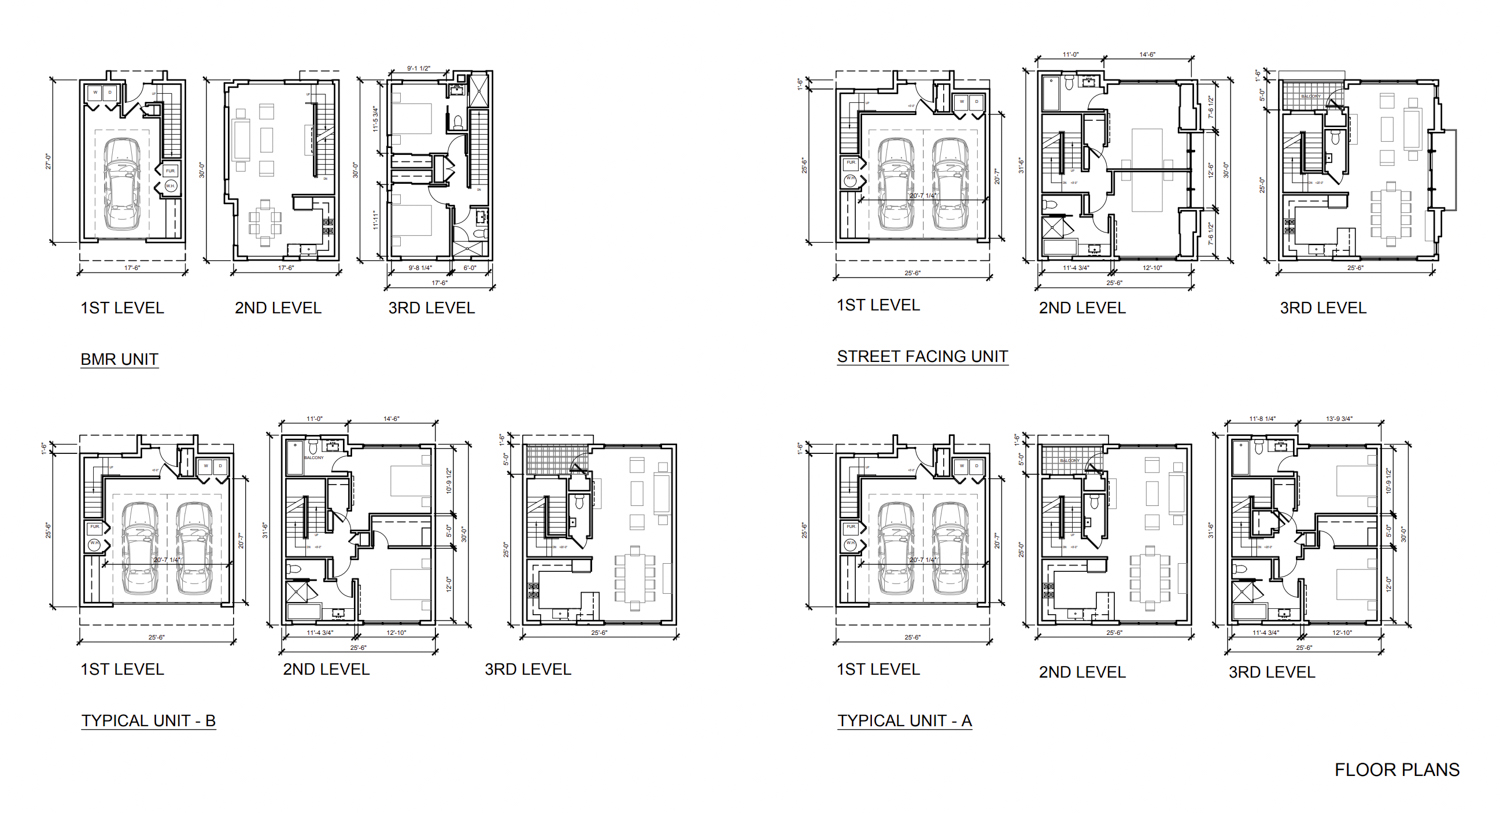 889 Moraga Road typical floor plans, rendering by Form4 Architecture